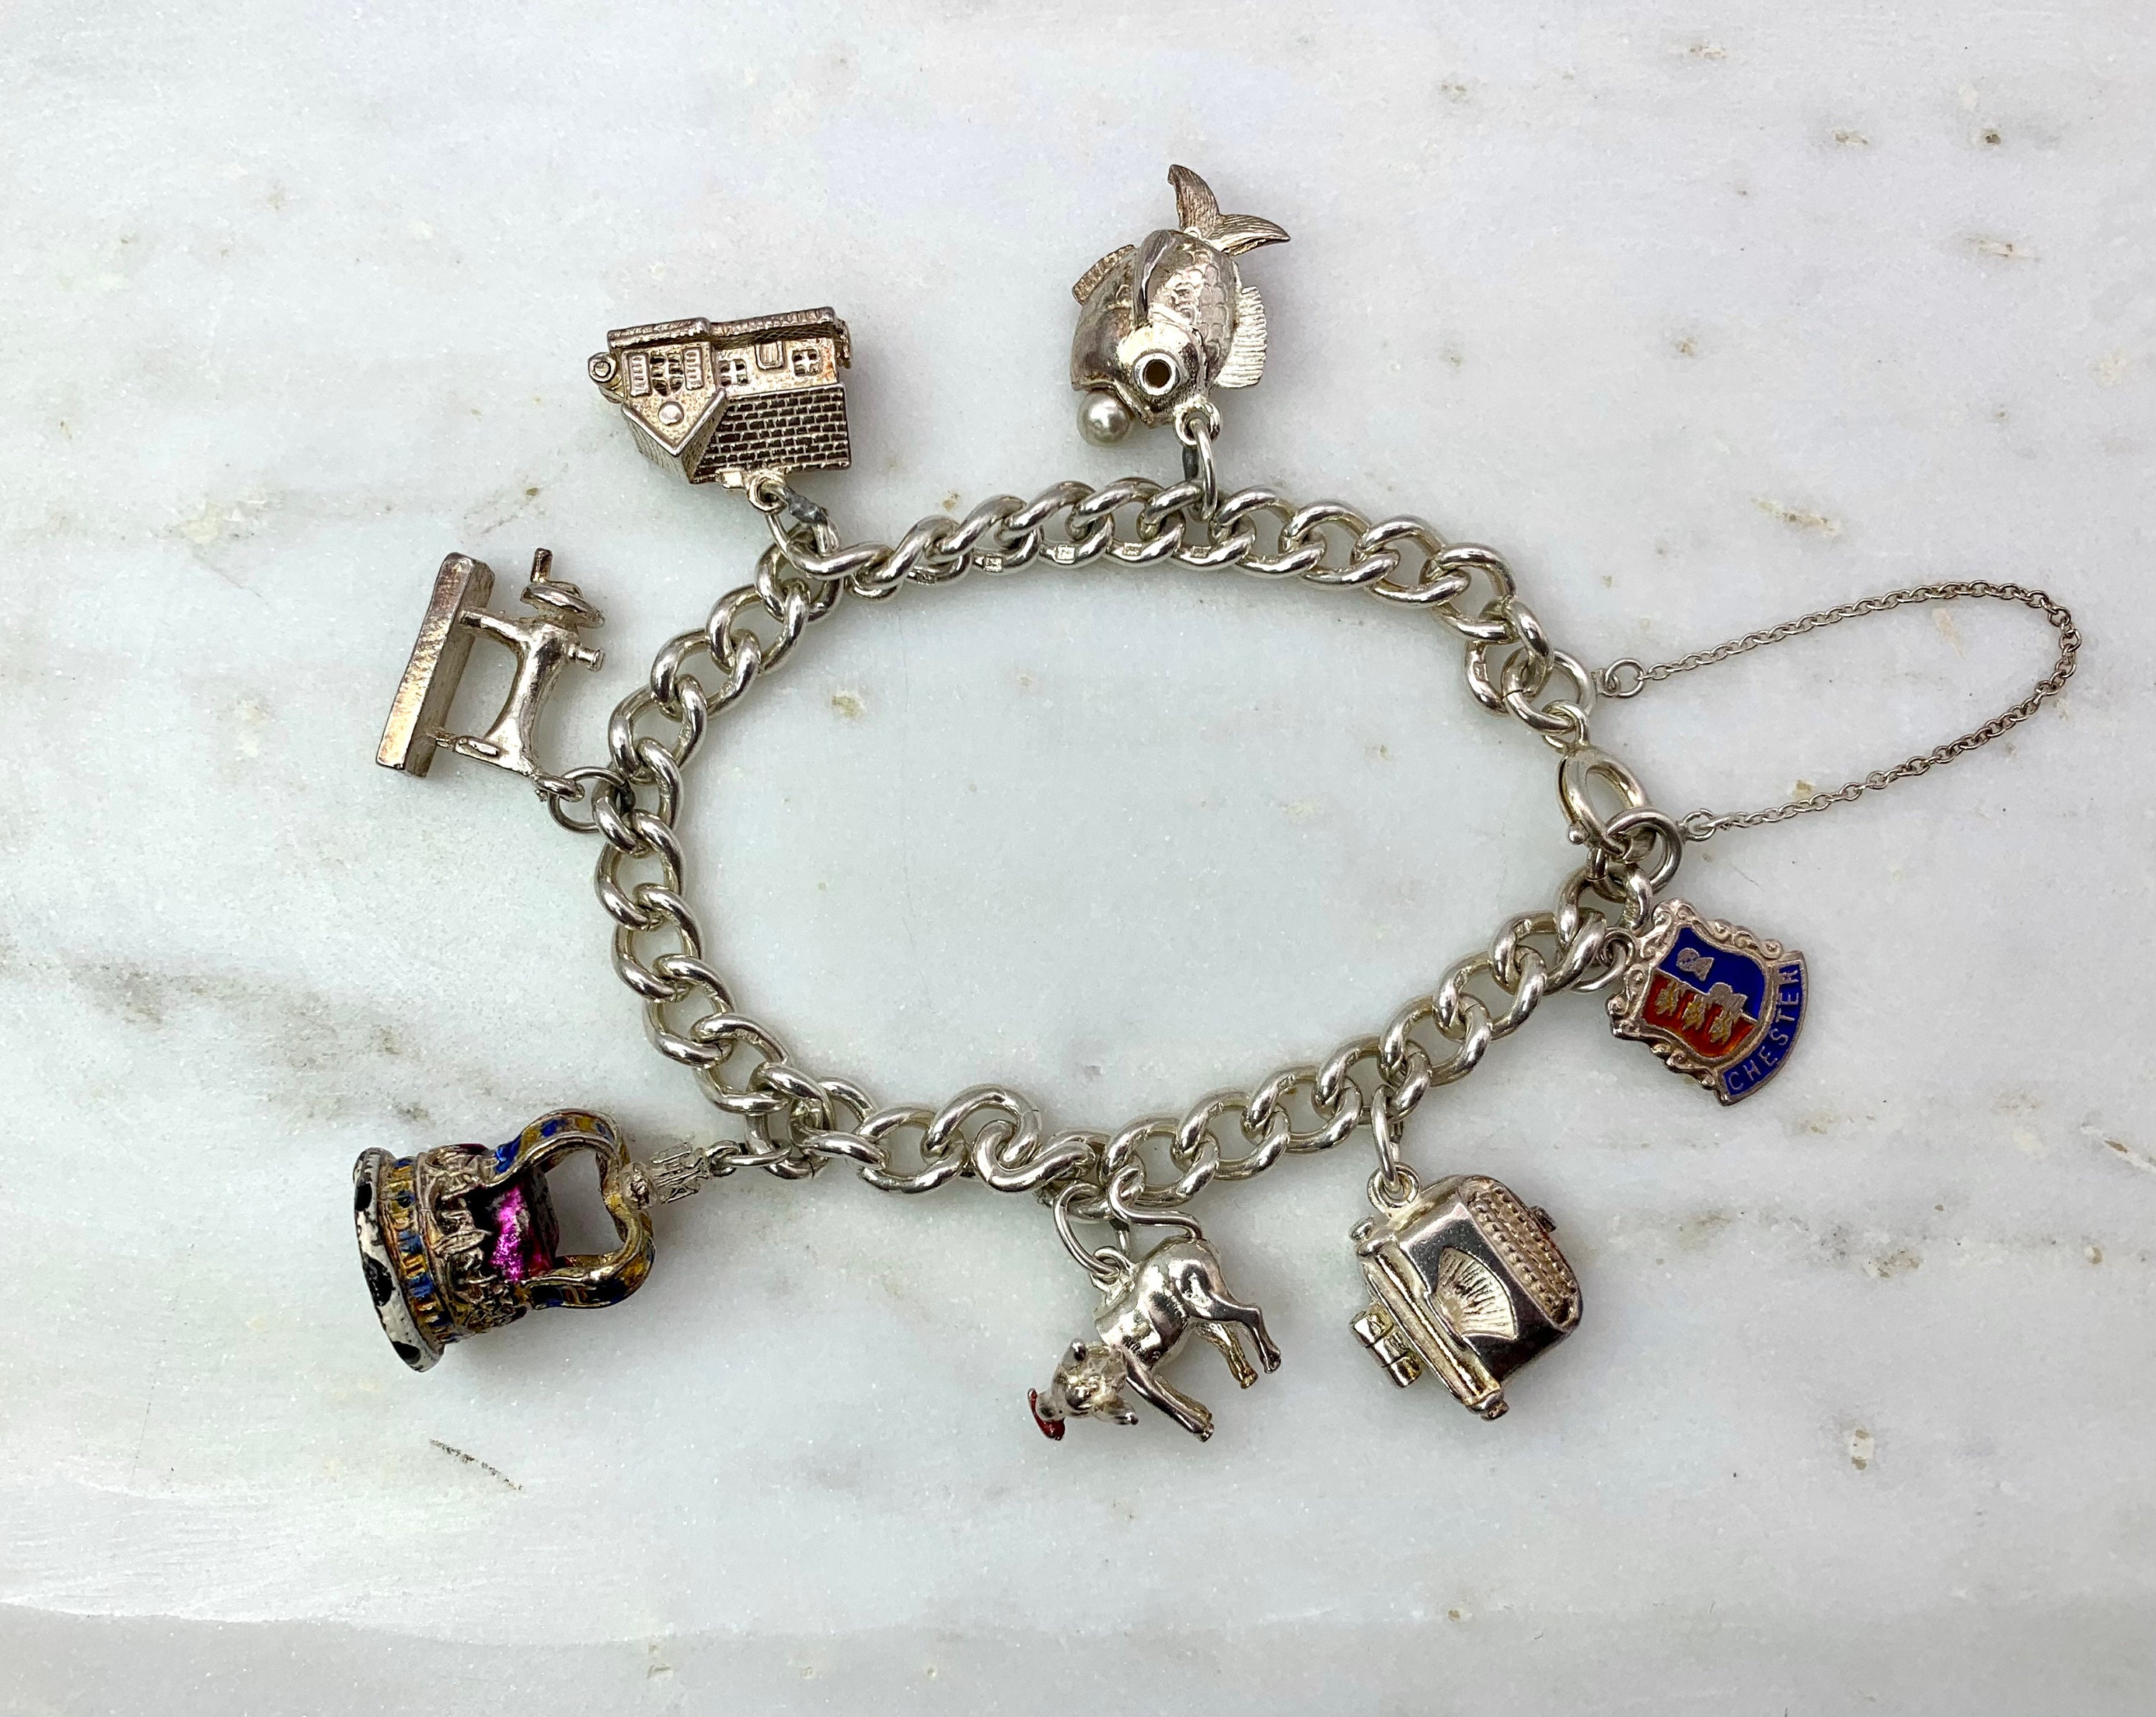 Vintage 1960s Sterling Silver Charm Bracelet With 29 Charms 